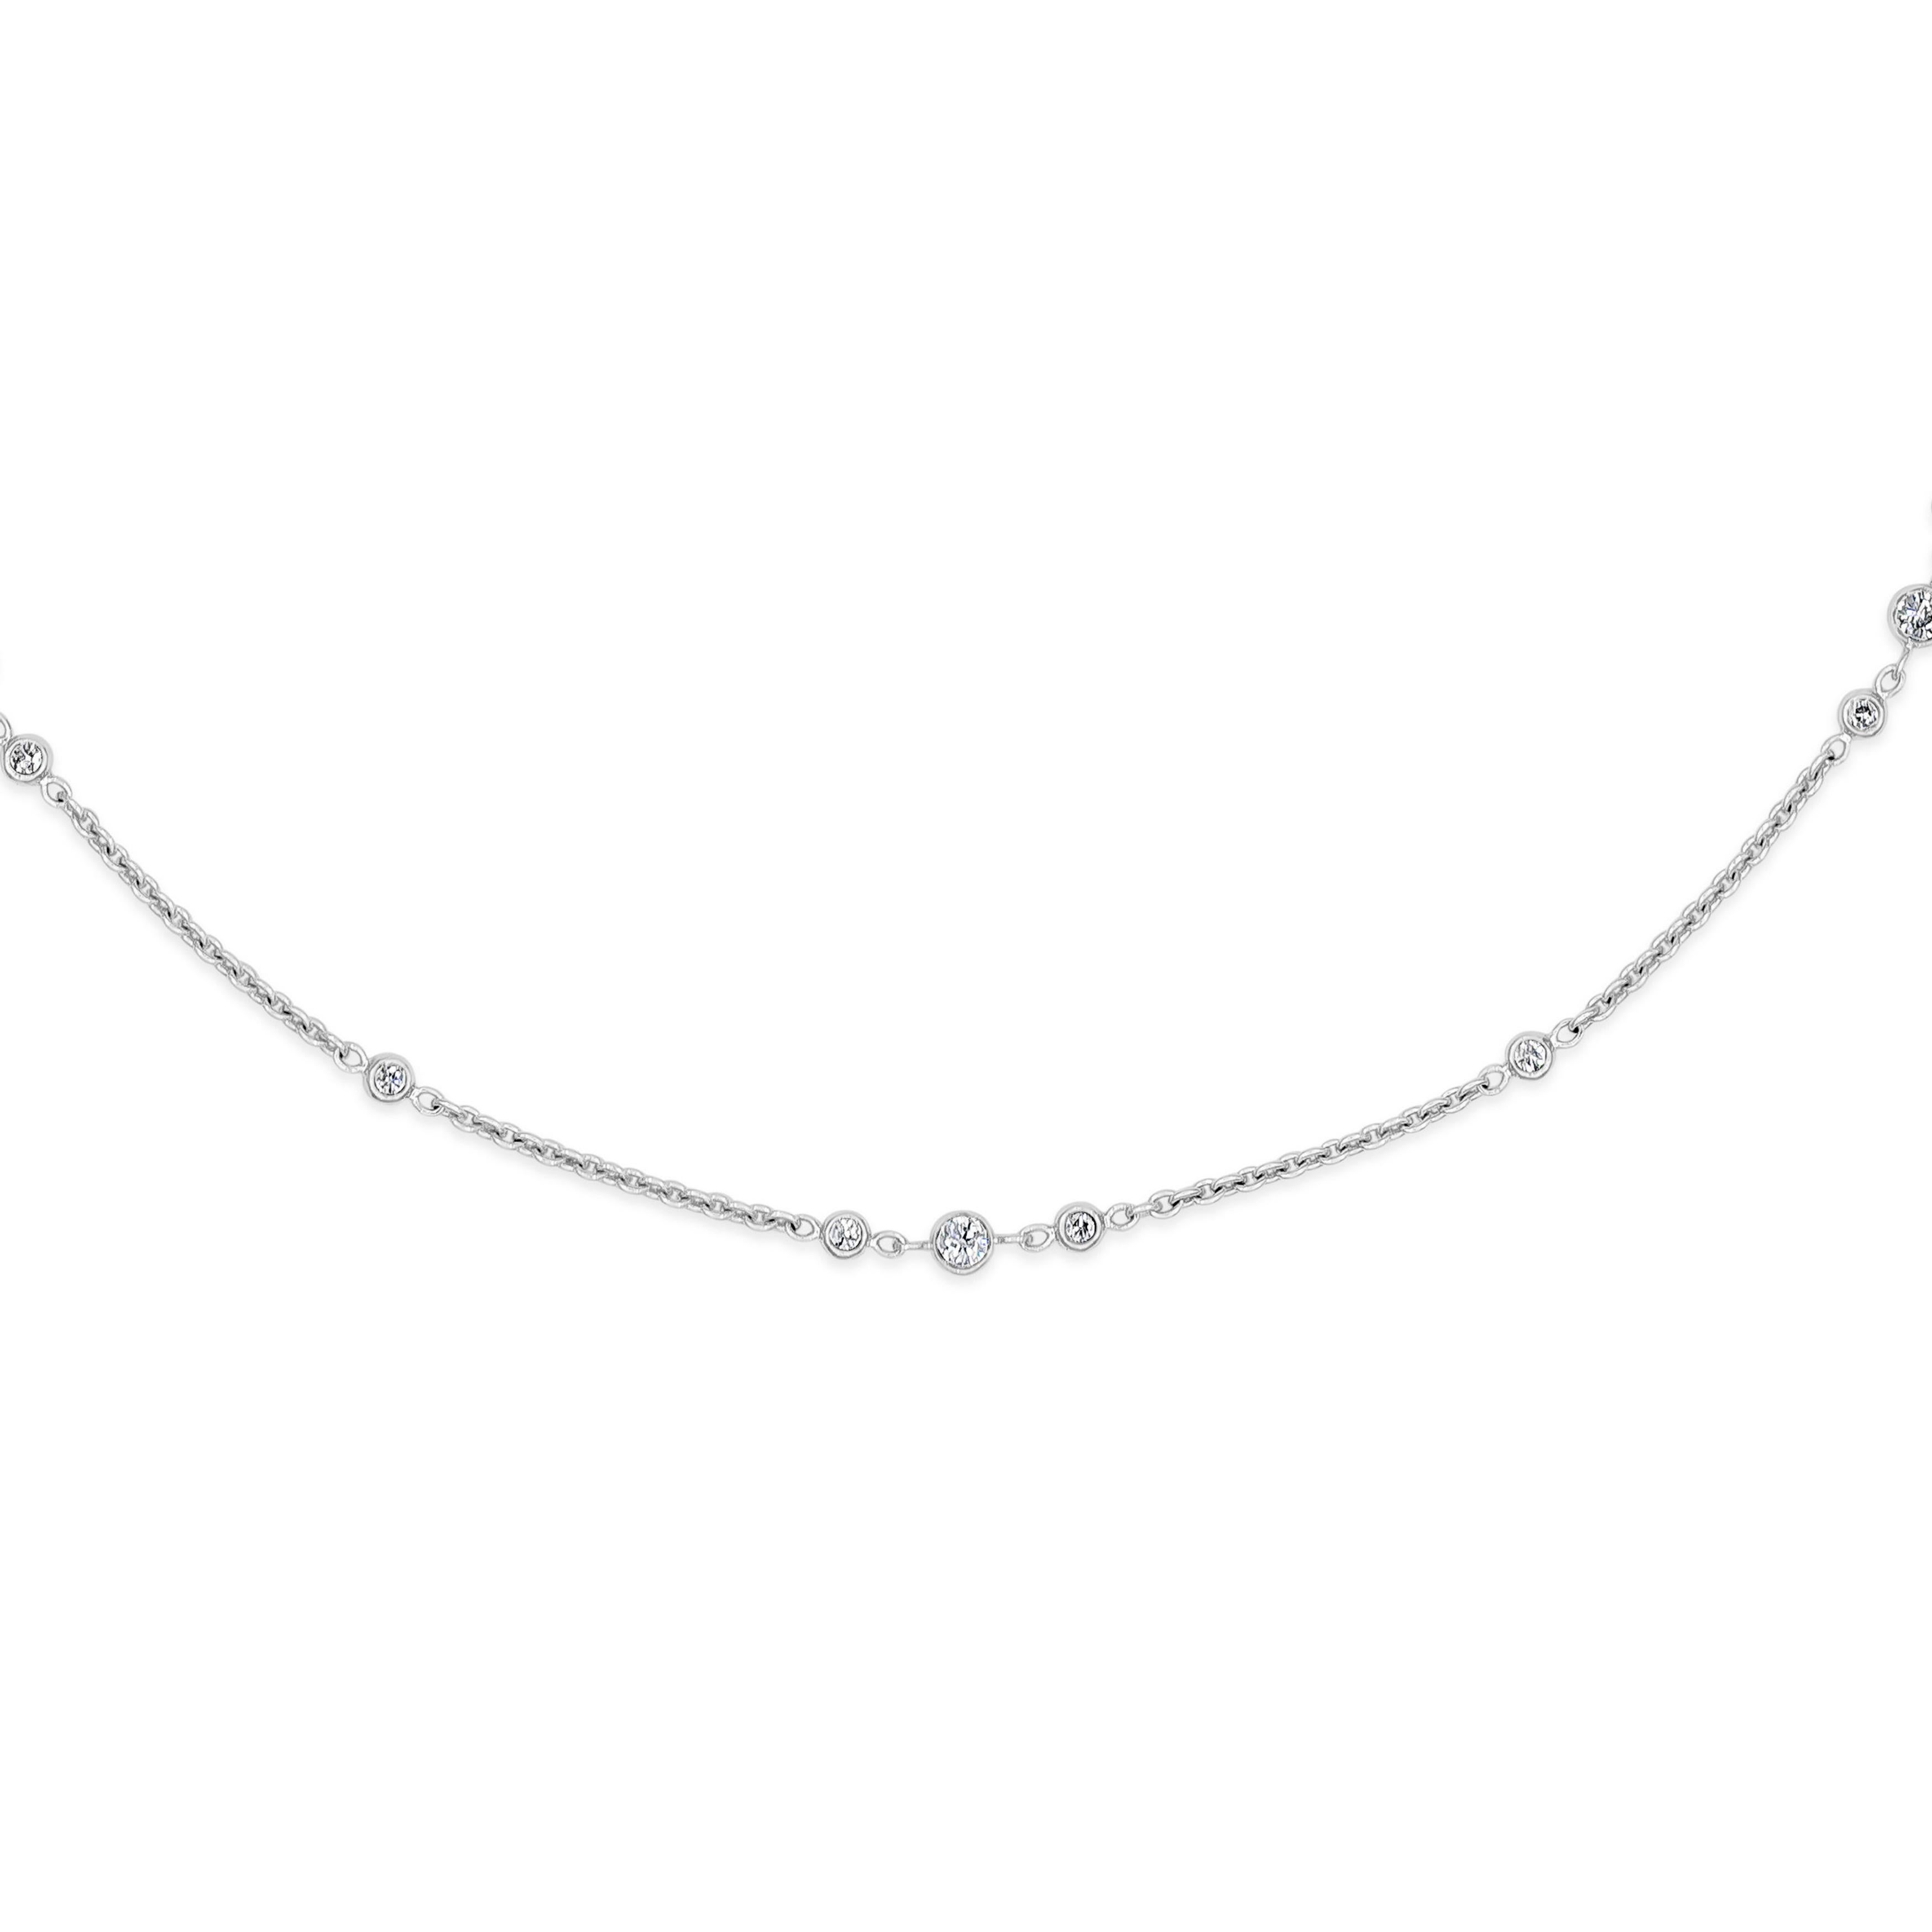 A classic and timeless piece showcasing and a thin 18 karat white gold chain, set with round brilliant diamonds in three-to one equal intervals. Diamonds weigh 0.67 carats total. 16 inches in length.

Roman Malakov is a custom house, specializing in